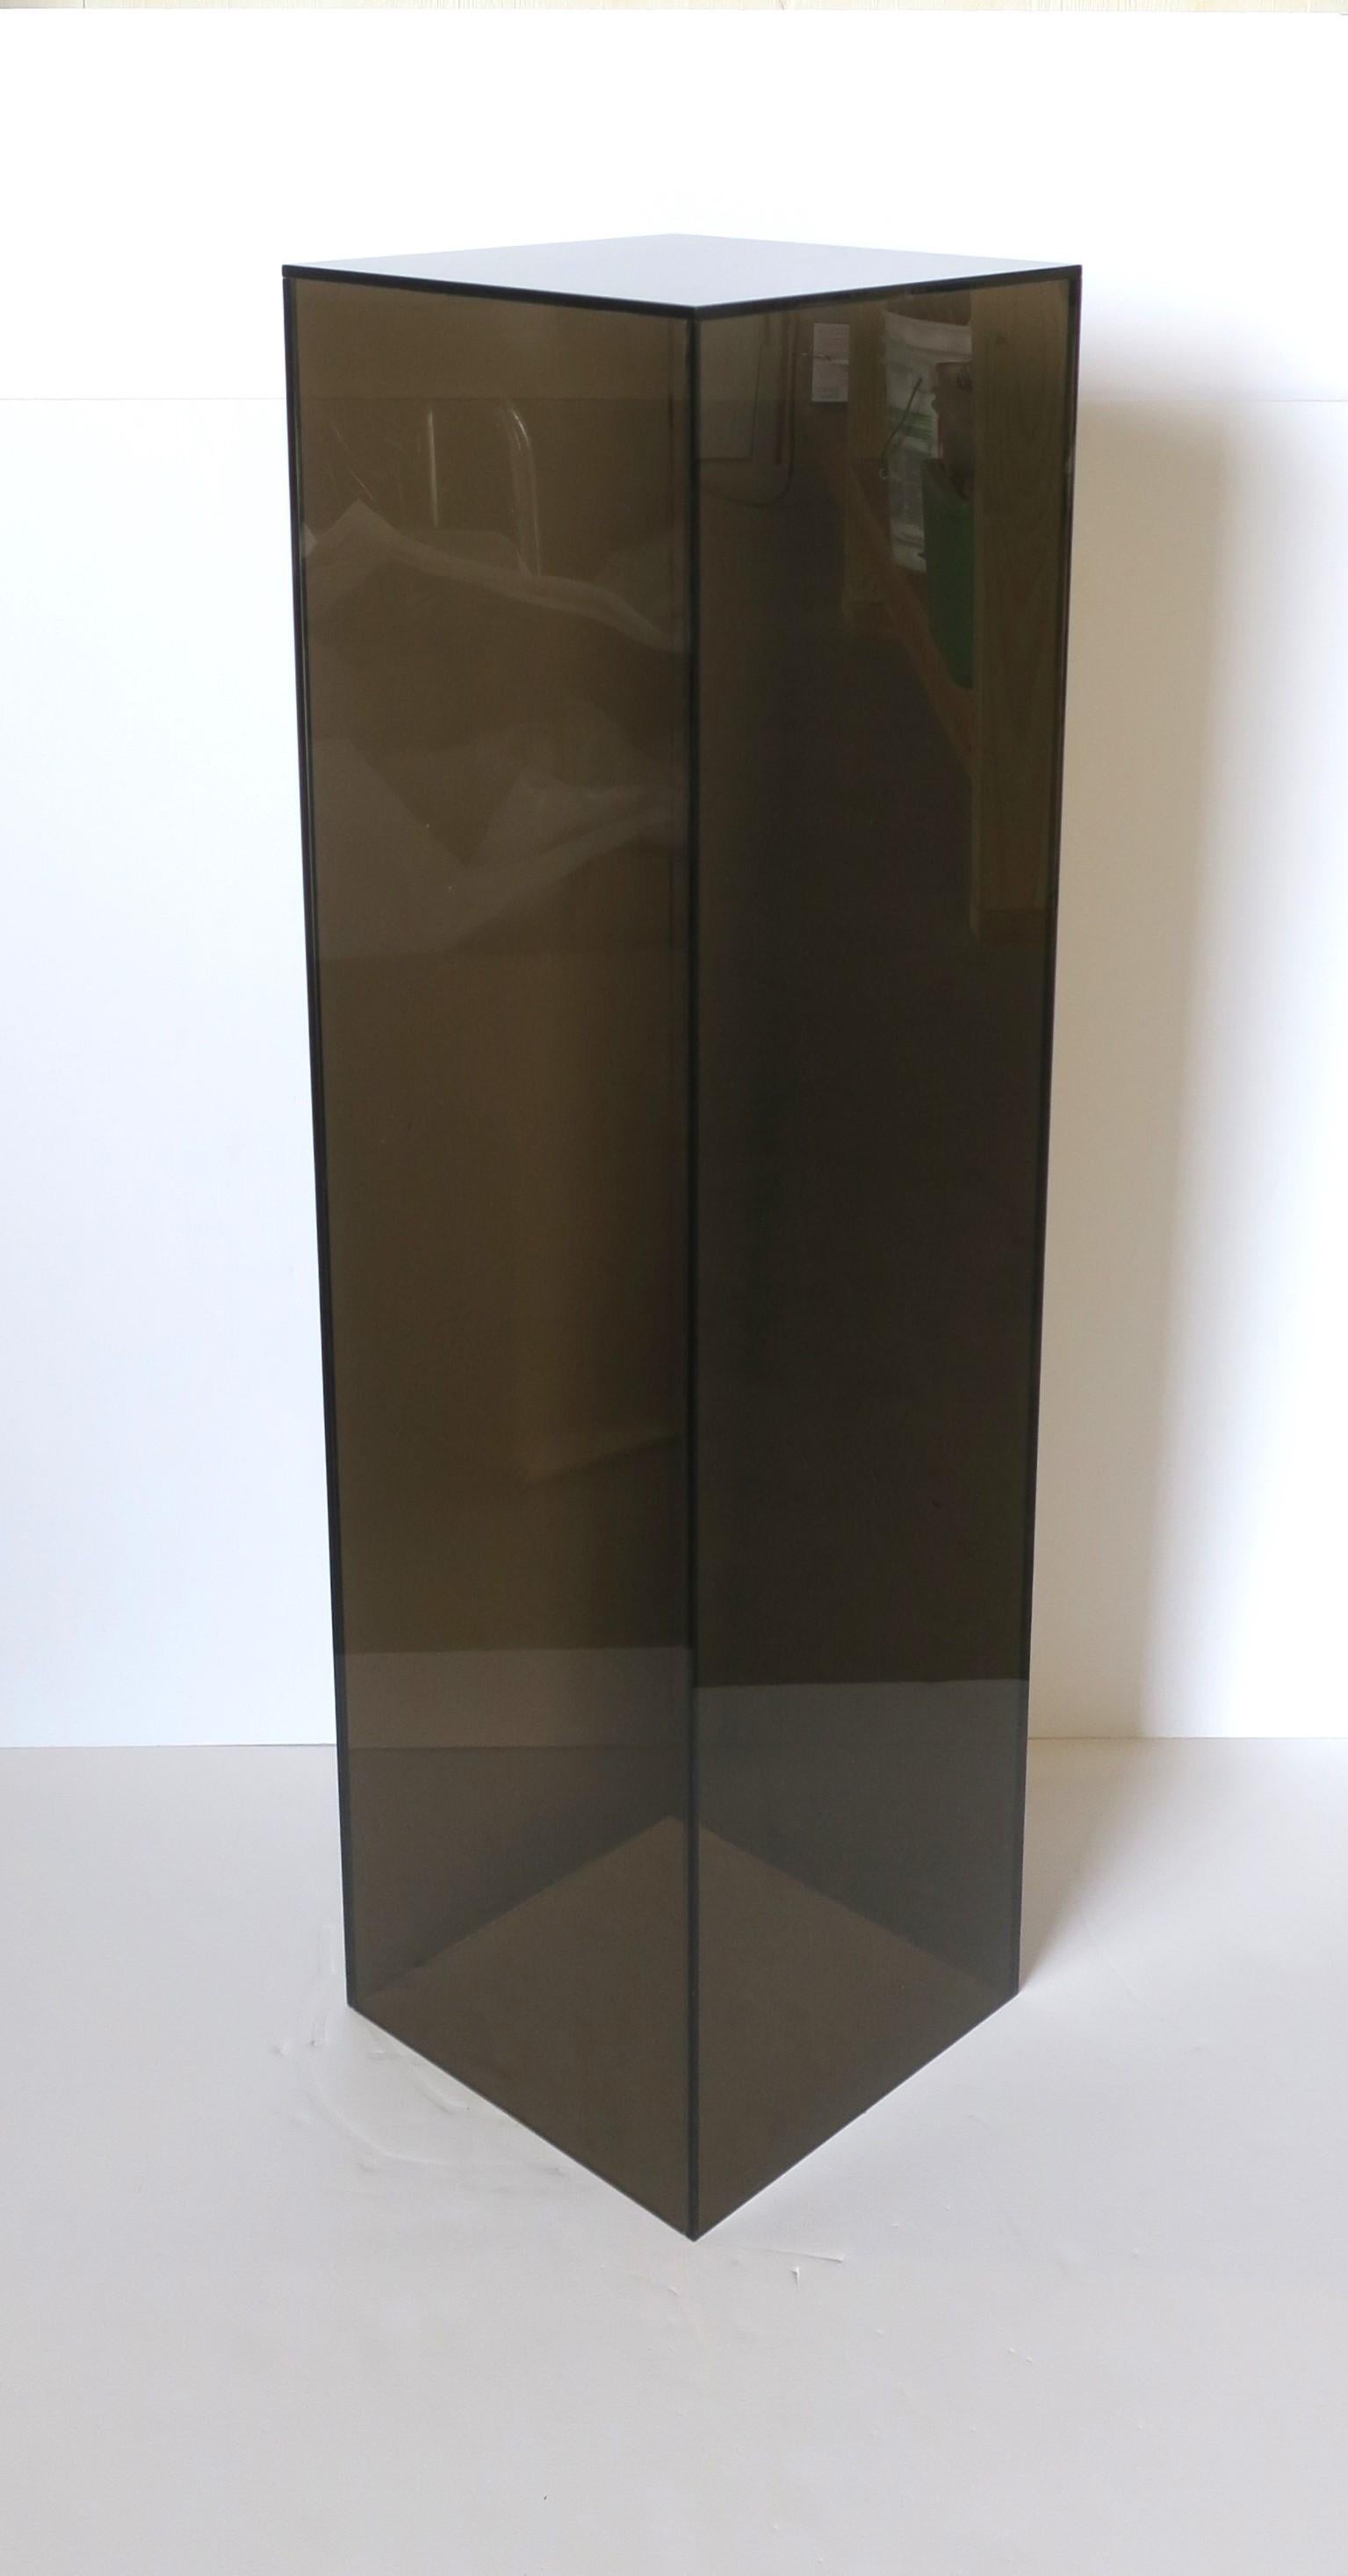 A rectangular smoked black translucent acrylic pedestal column stand, in the modern style, circa late-20th to early 21st century. A great piece to hold or display items such as sculpture, plant, art, jewelry, etc. Very good condition as shown in